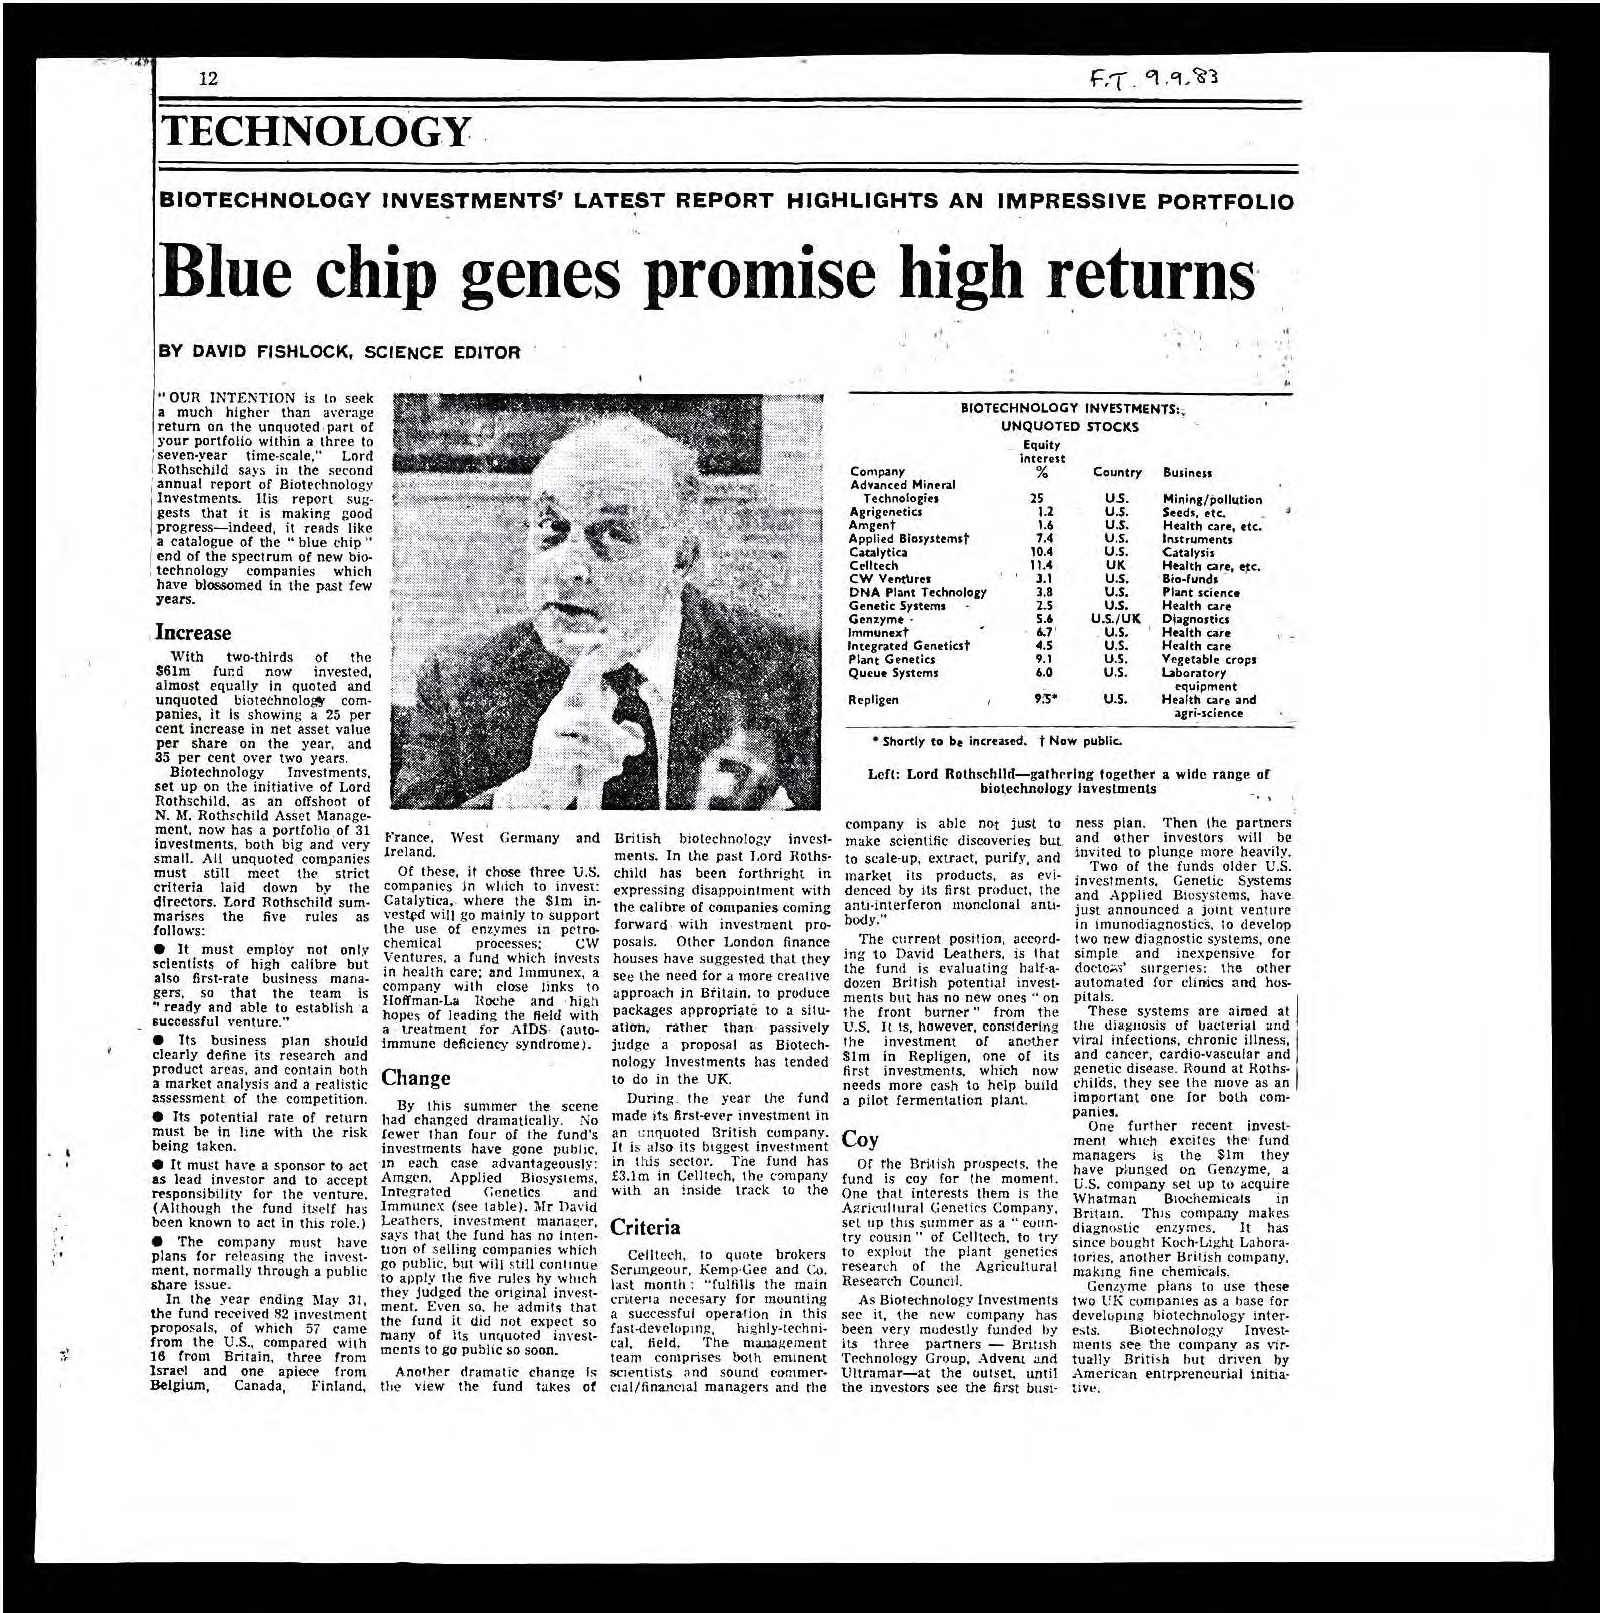 David Fishlock. (Sep. 09, 1983). Blue chip genes promis high returns re. Lord Victor Rothschild Biotechnology Investments Limited (BIL), Co. No. 02892872, N.M. Rothschild Asset Management, p. 6. Financial Times.